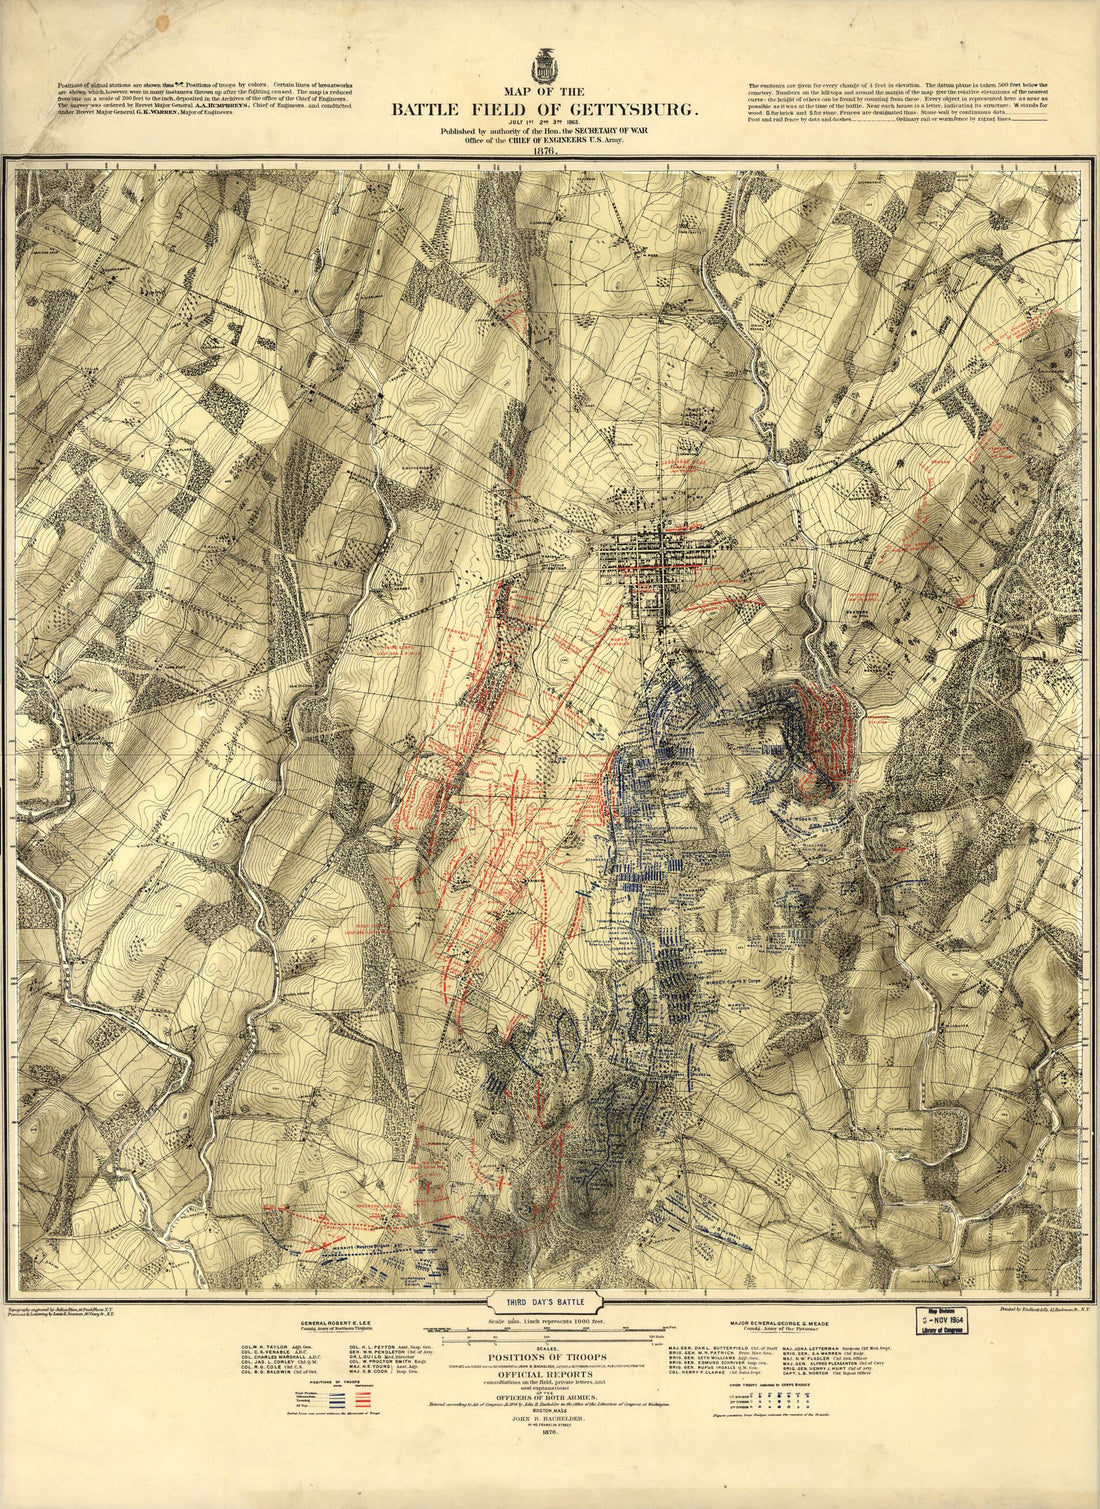 This old map of Map of the Battle Field of Gettysburg. July 1st, 2nd, 3rd, 1863 from 1879 was created by John B. (John Badger) Bachelder in 1879